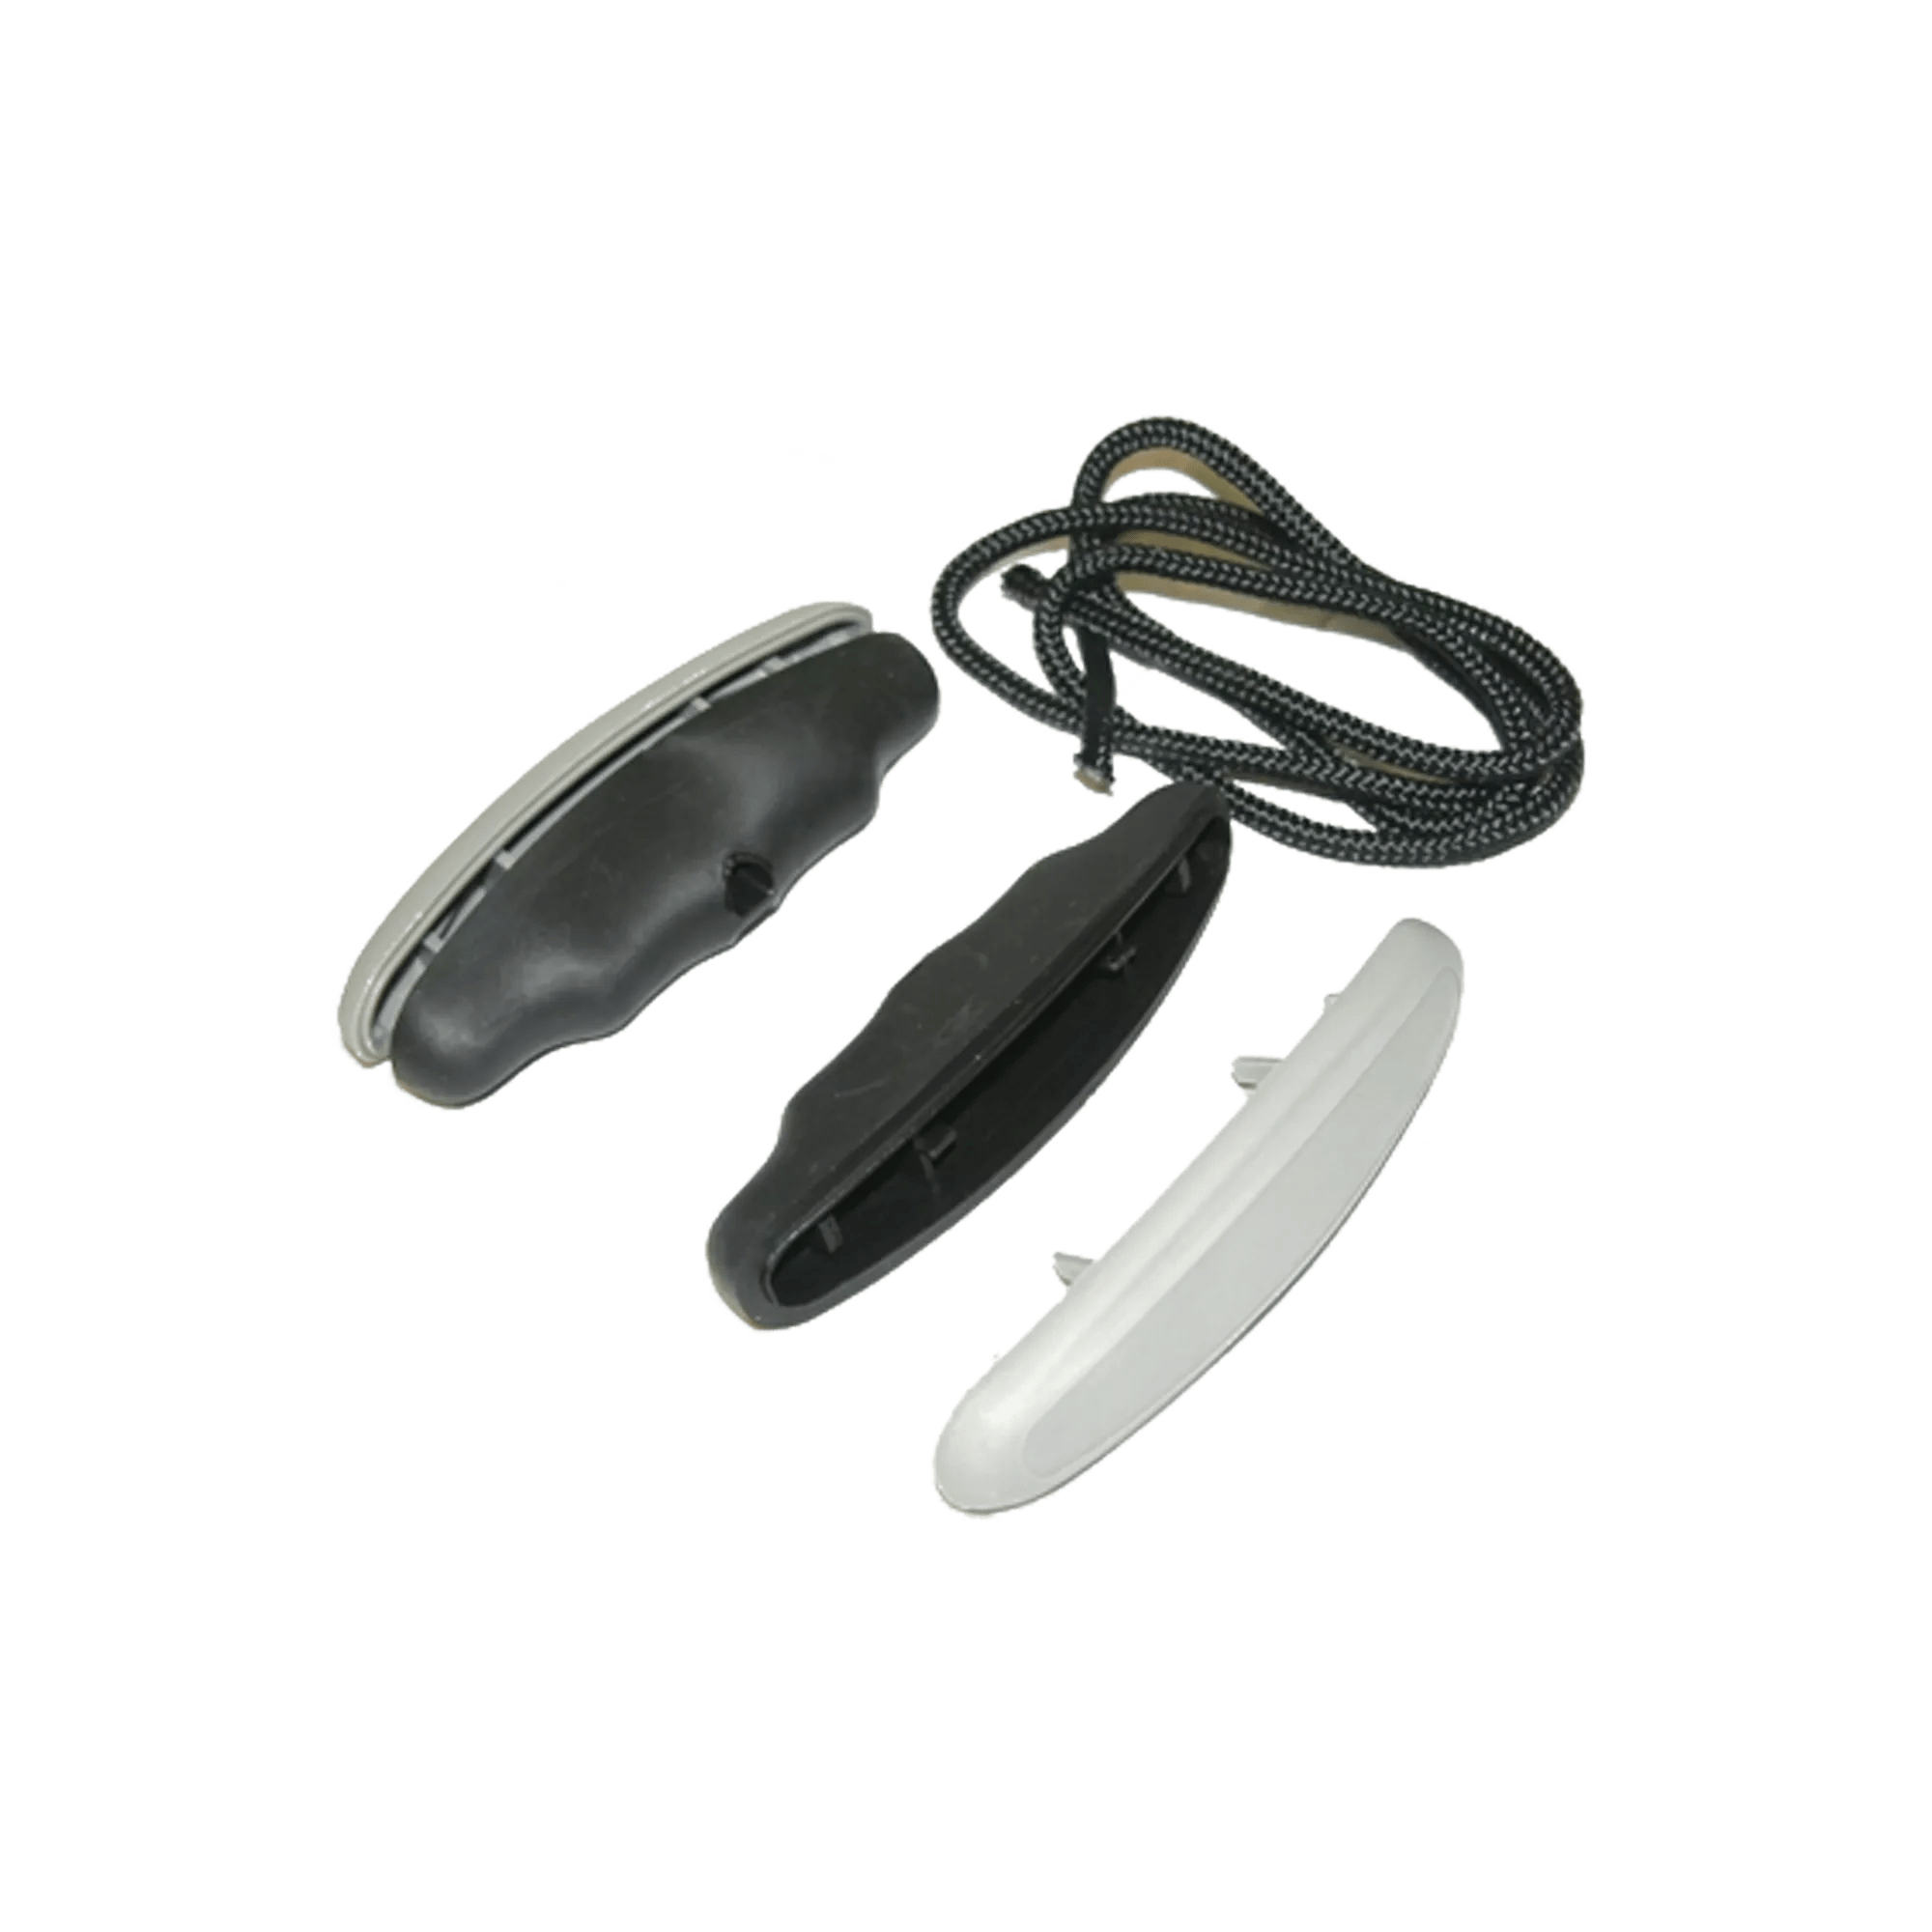 WILDERNESS SYSTEMS - Soft Touch Kayak Toggle Handles - One Pair -  - 9810110 - ISO